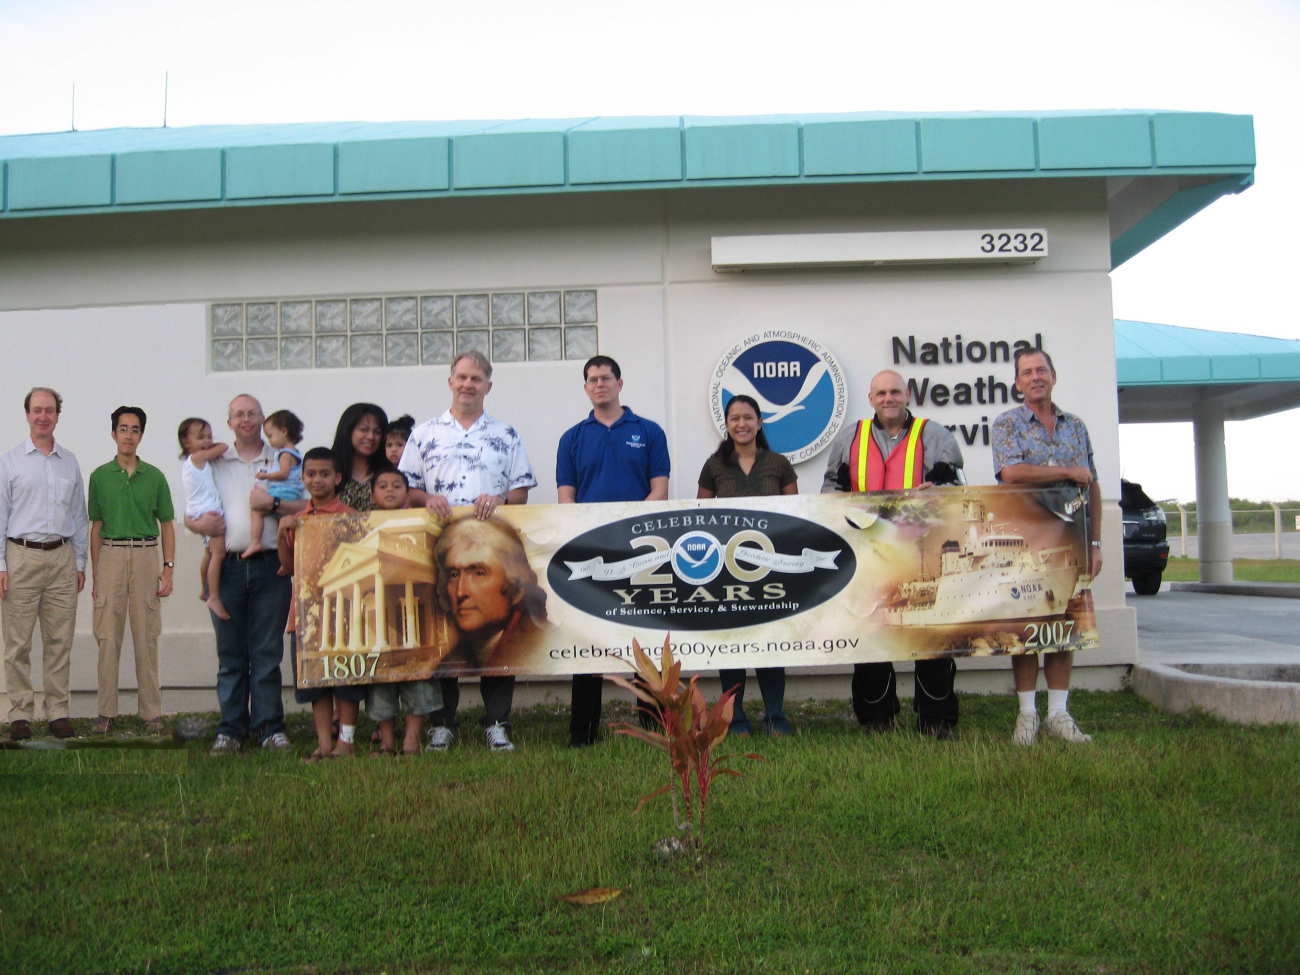 Hafa Adai and greetings from where America's day begins! NOAA's Weather Forecast Office in Guam is the only National Weather Service Office west of theInternational Date Line